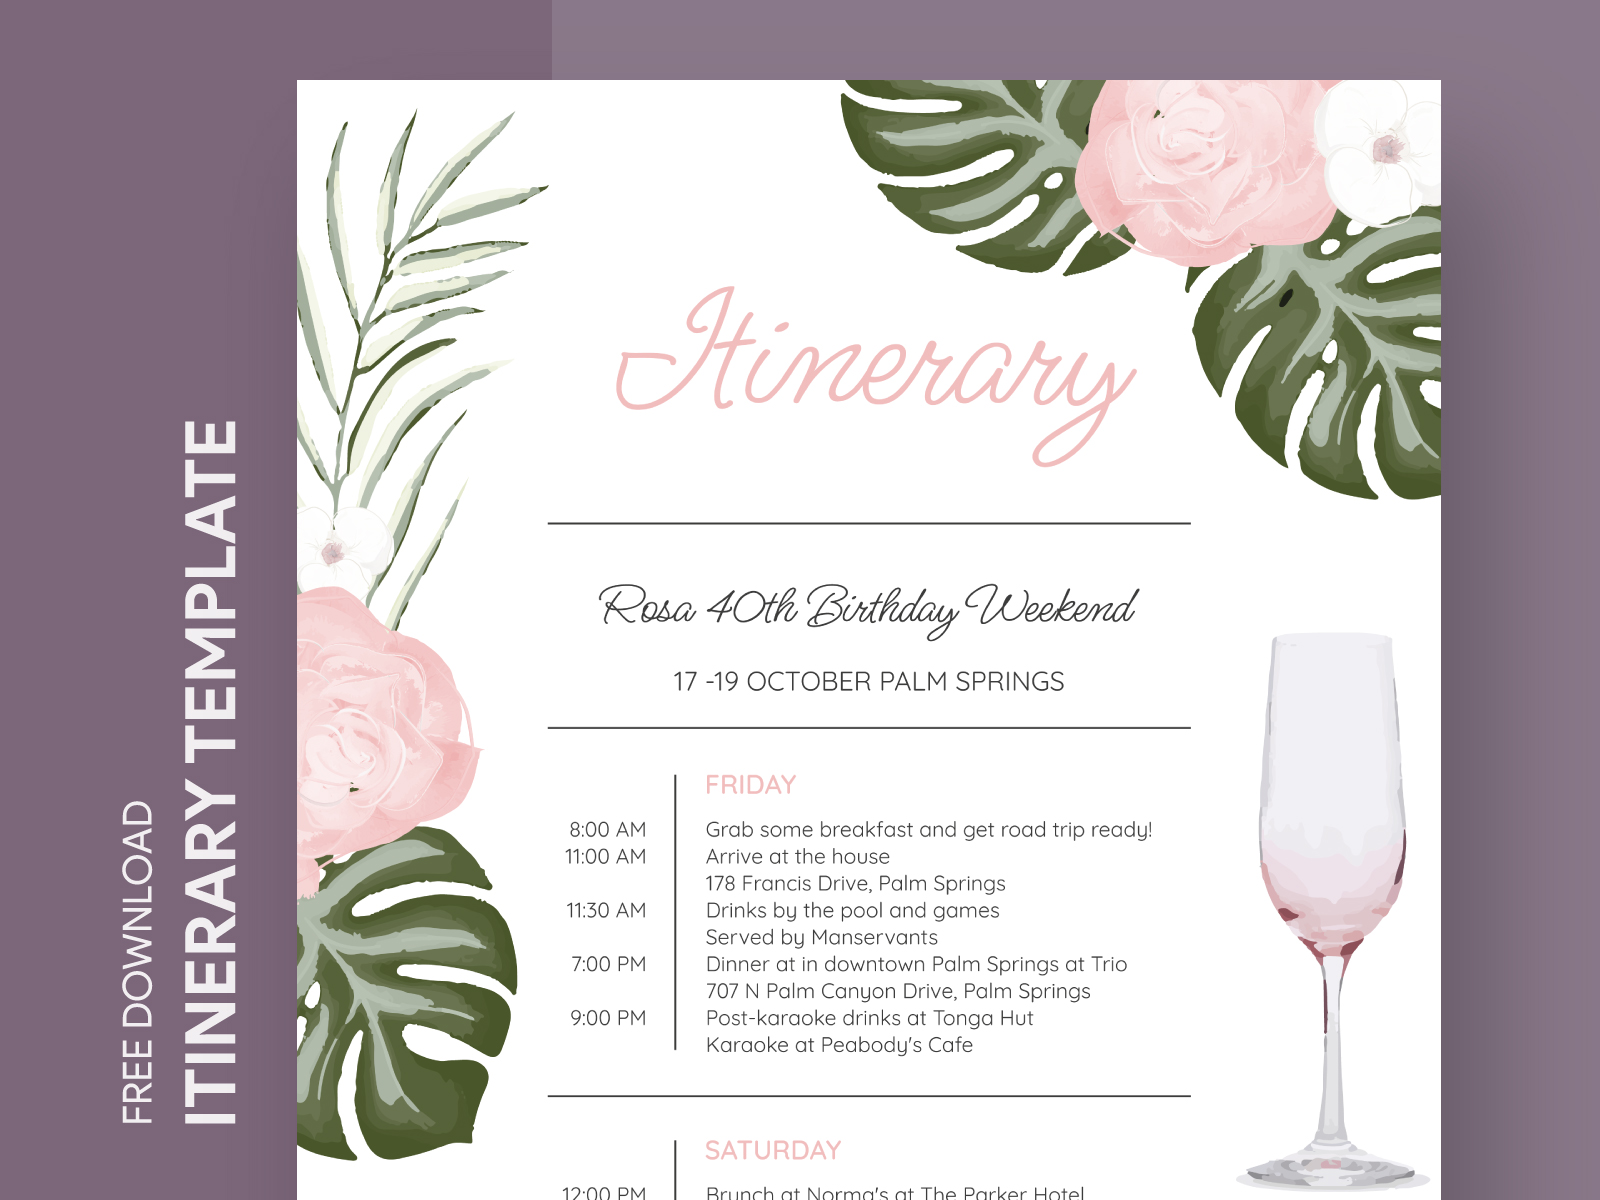 Event Itinerary Free Google Docs Template By Free Google Docs Templates -  Gdoc.Io On Dribbble